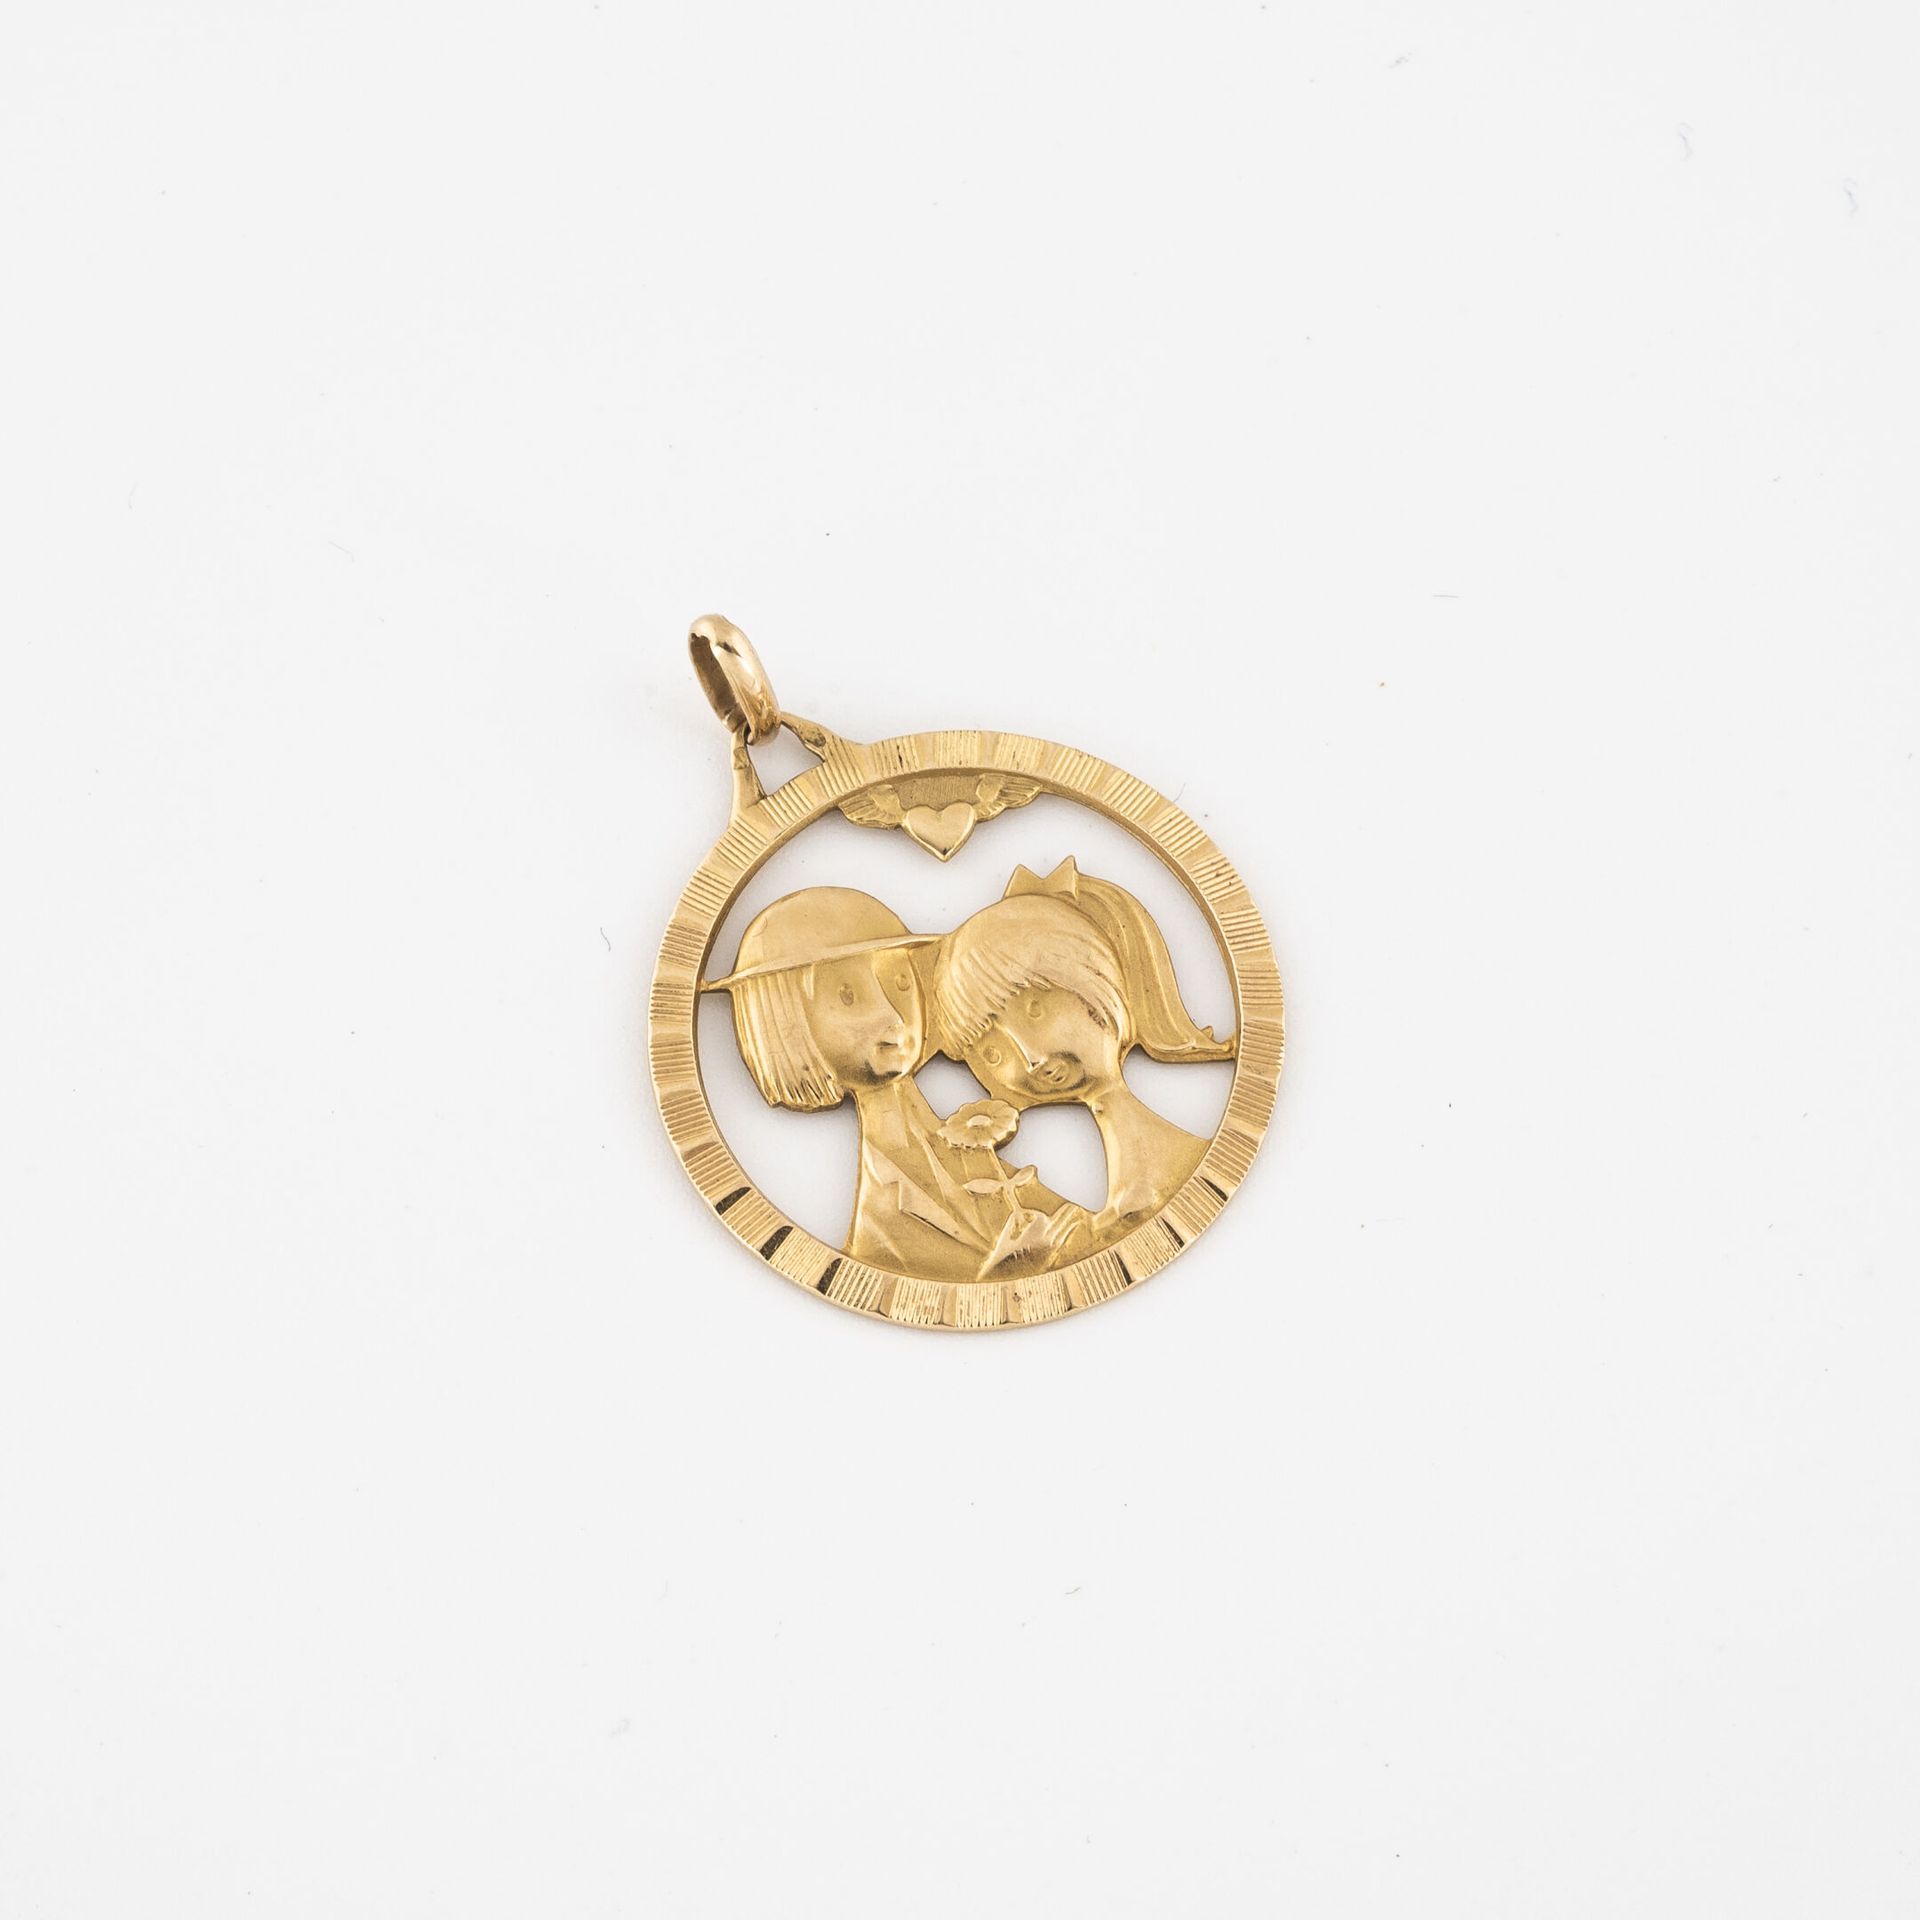 Null Circular medal "Les amoureux" by Peynet in yellow gold (750).

Marked with &hellip;